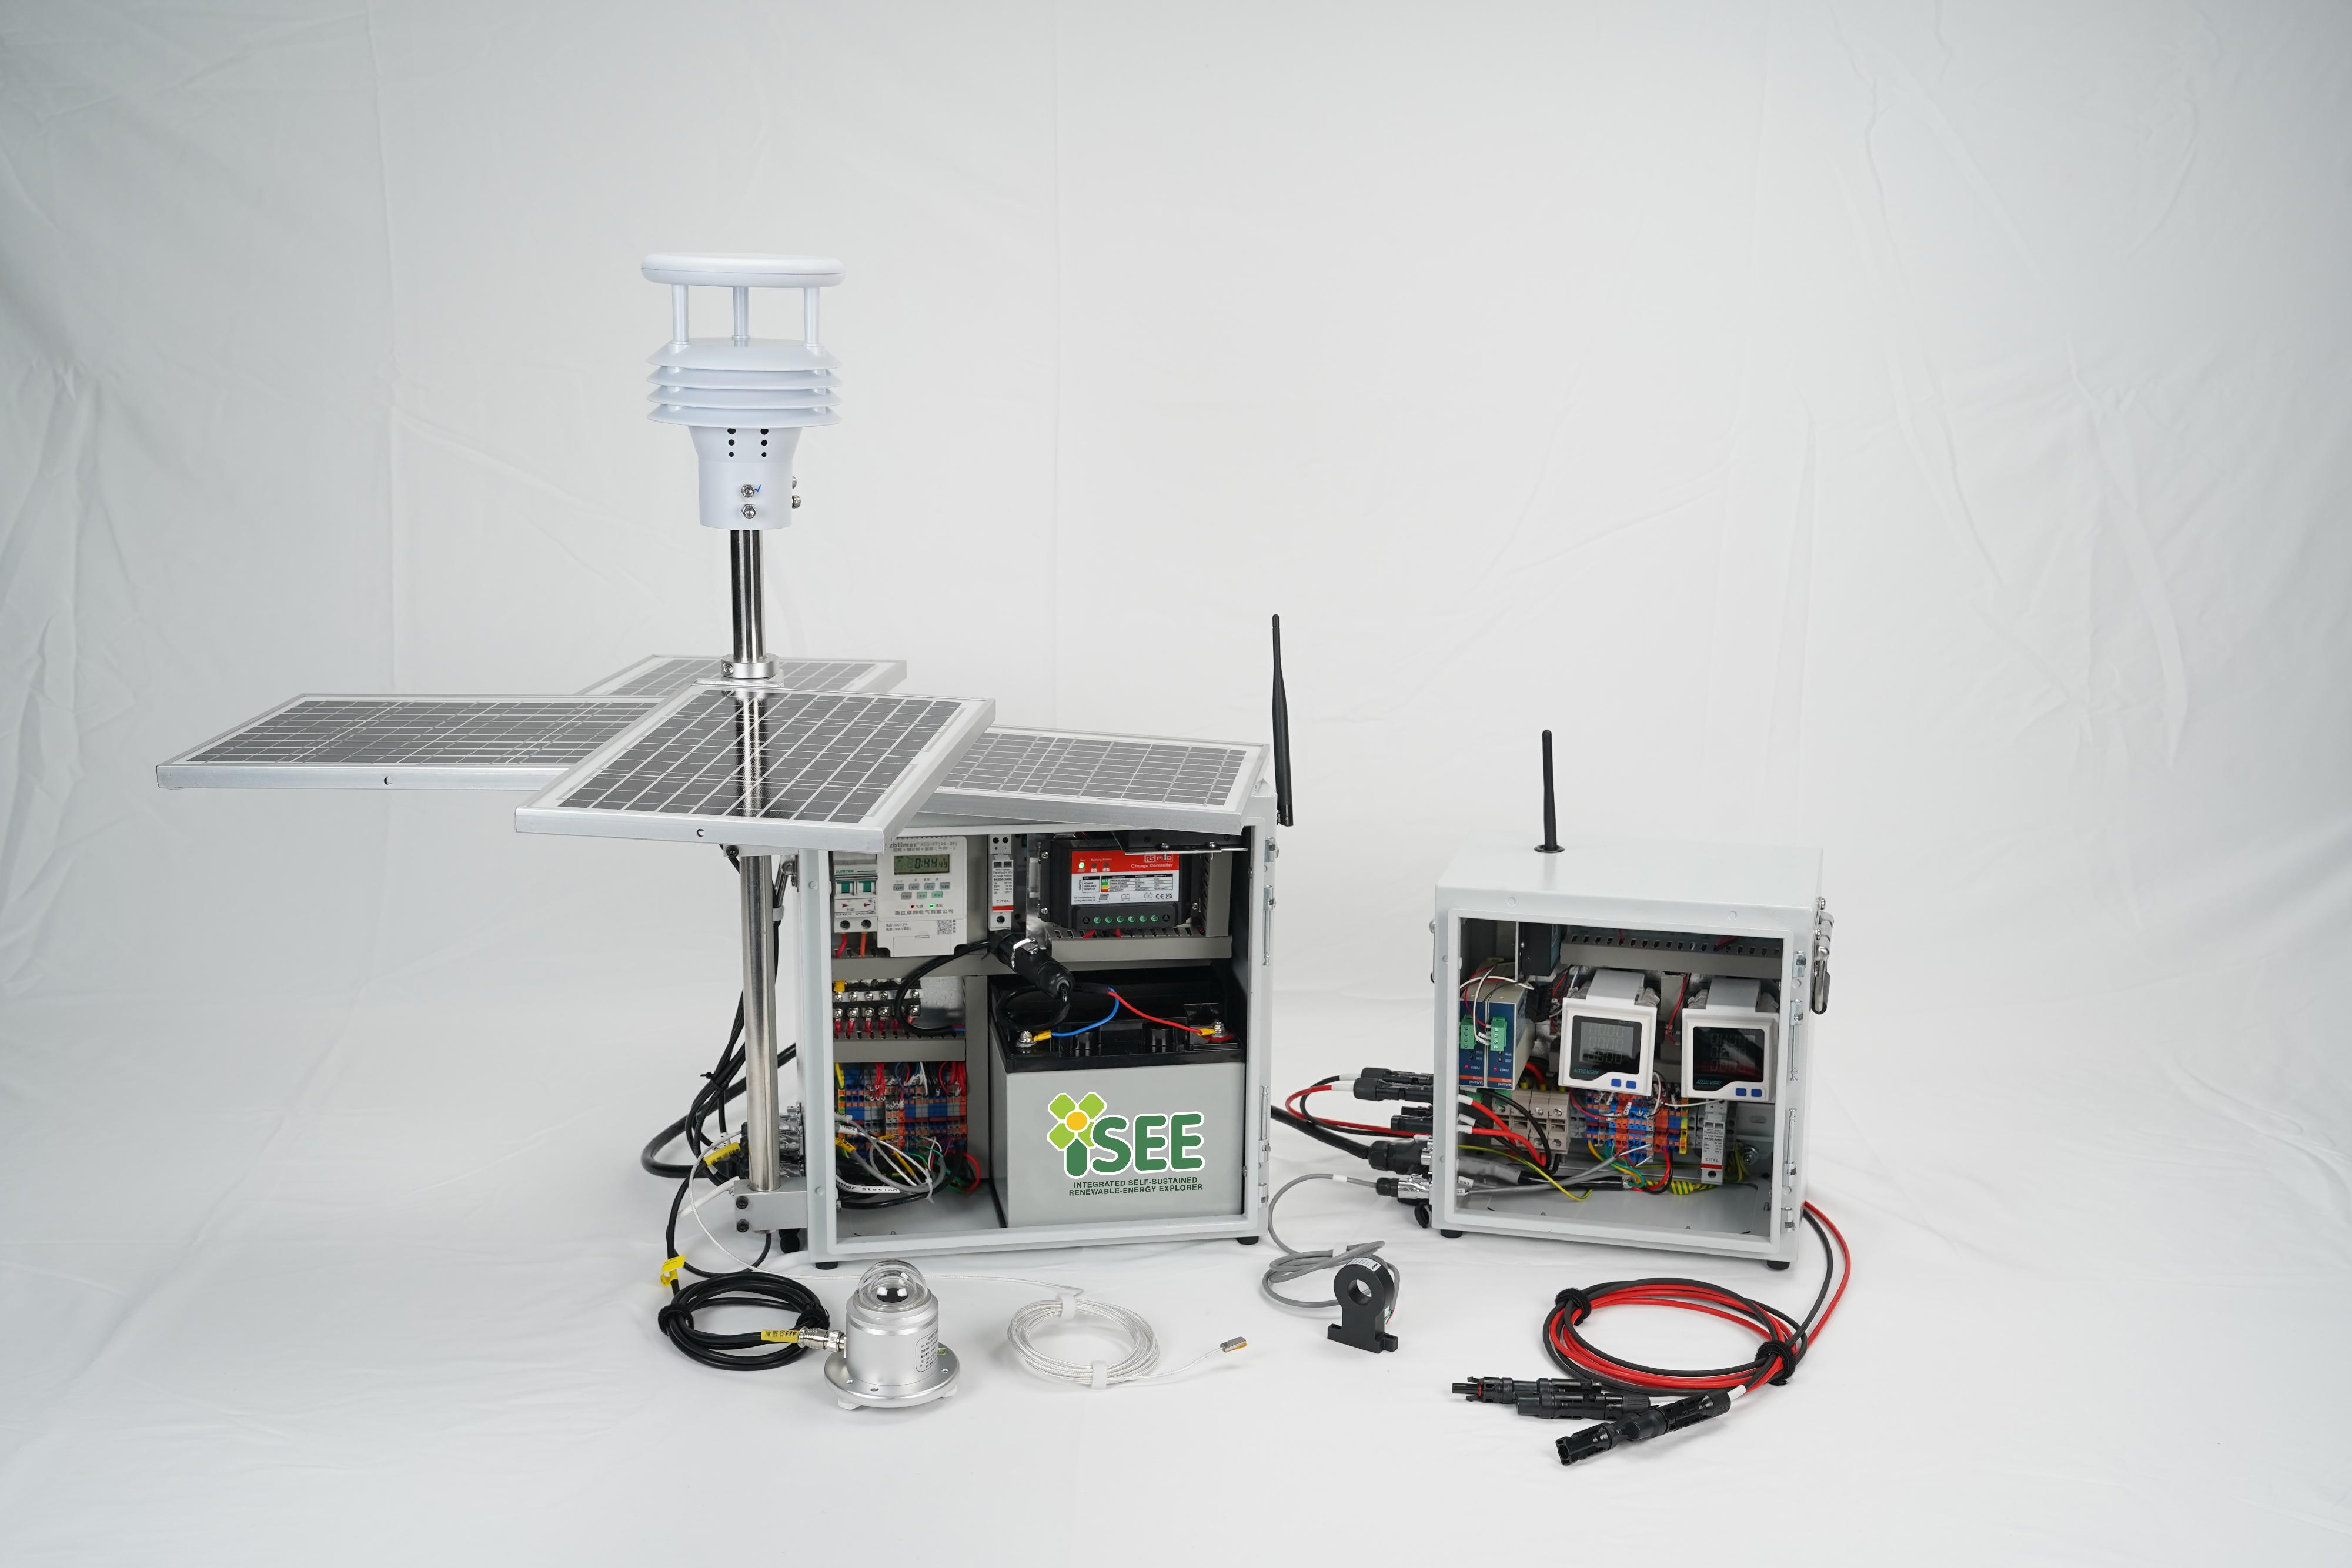 The Electrical and Mechanical Services Department achieved outstanding results at the 48th International Exhibition of Inventions of Geneva, winning one special award, three gold medals, seven silver medals and 12 bronze medals. Photo shows Gold Medal-winning Integrated Self-sustained renewable-Energy Explorer (iSEE).